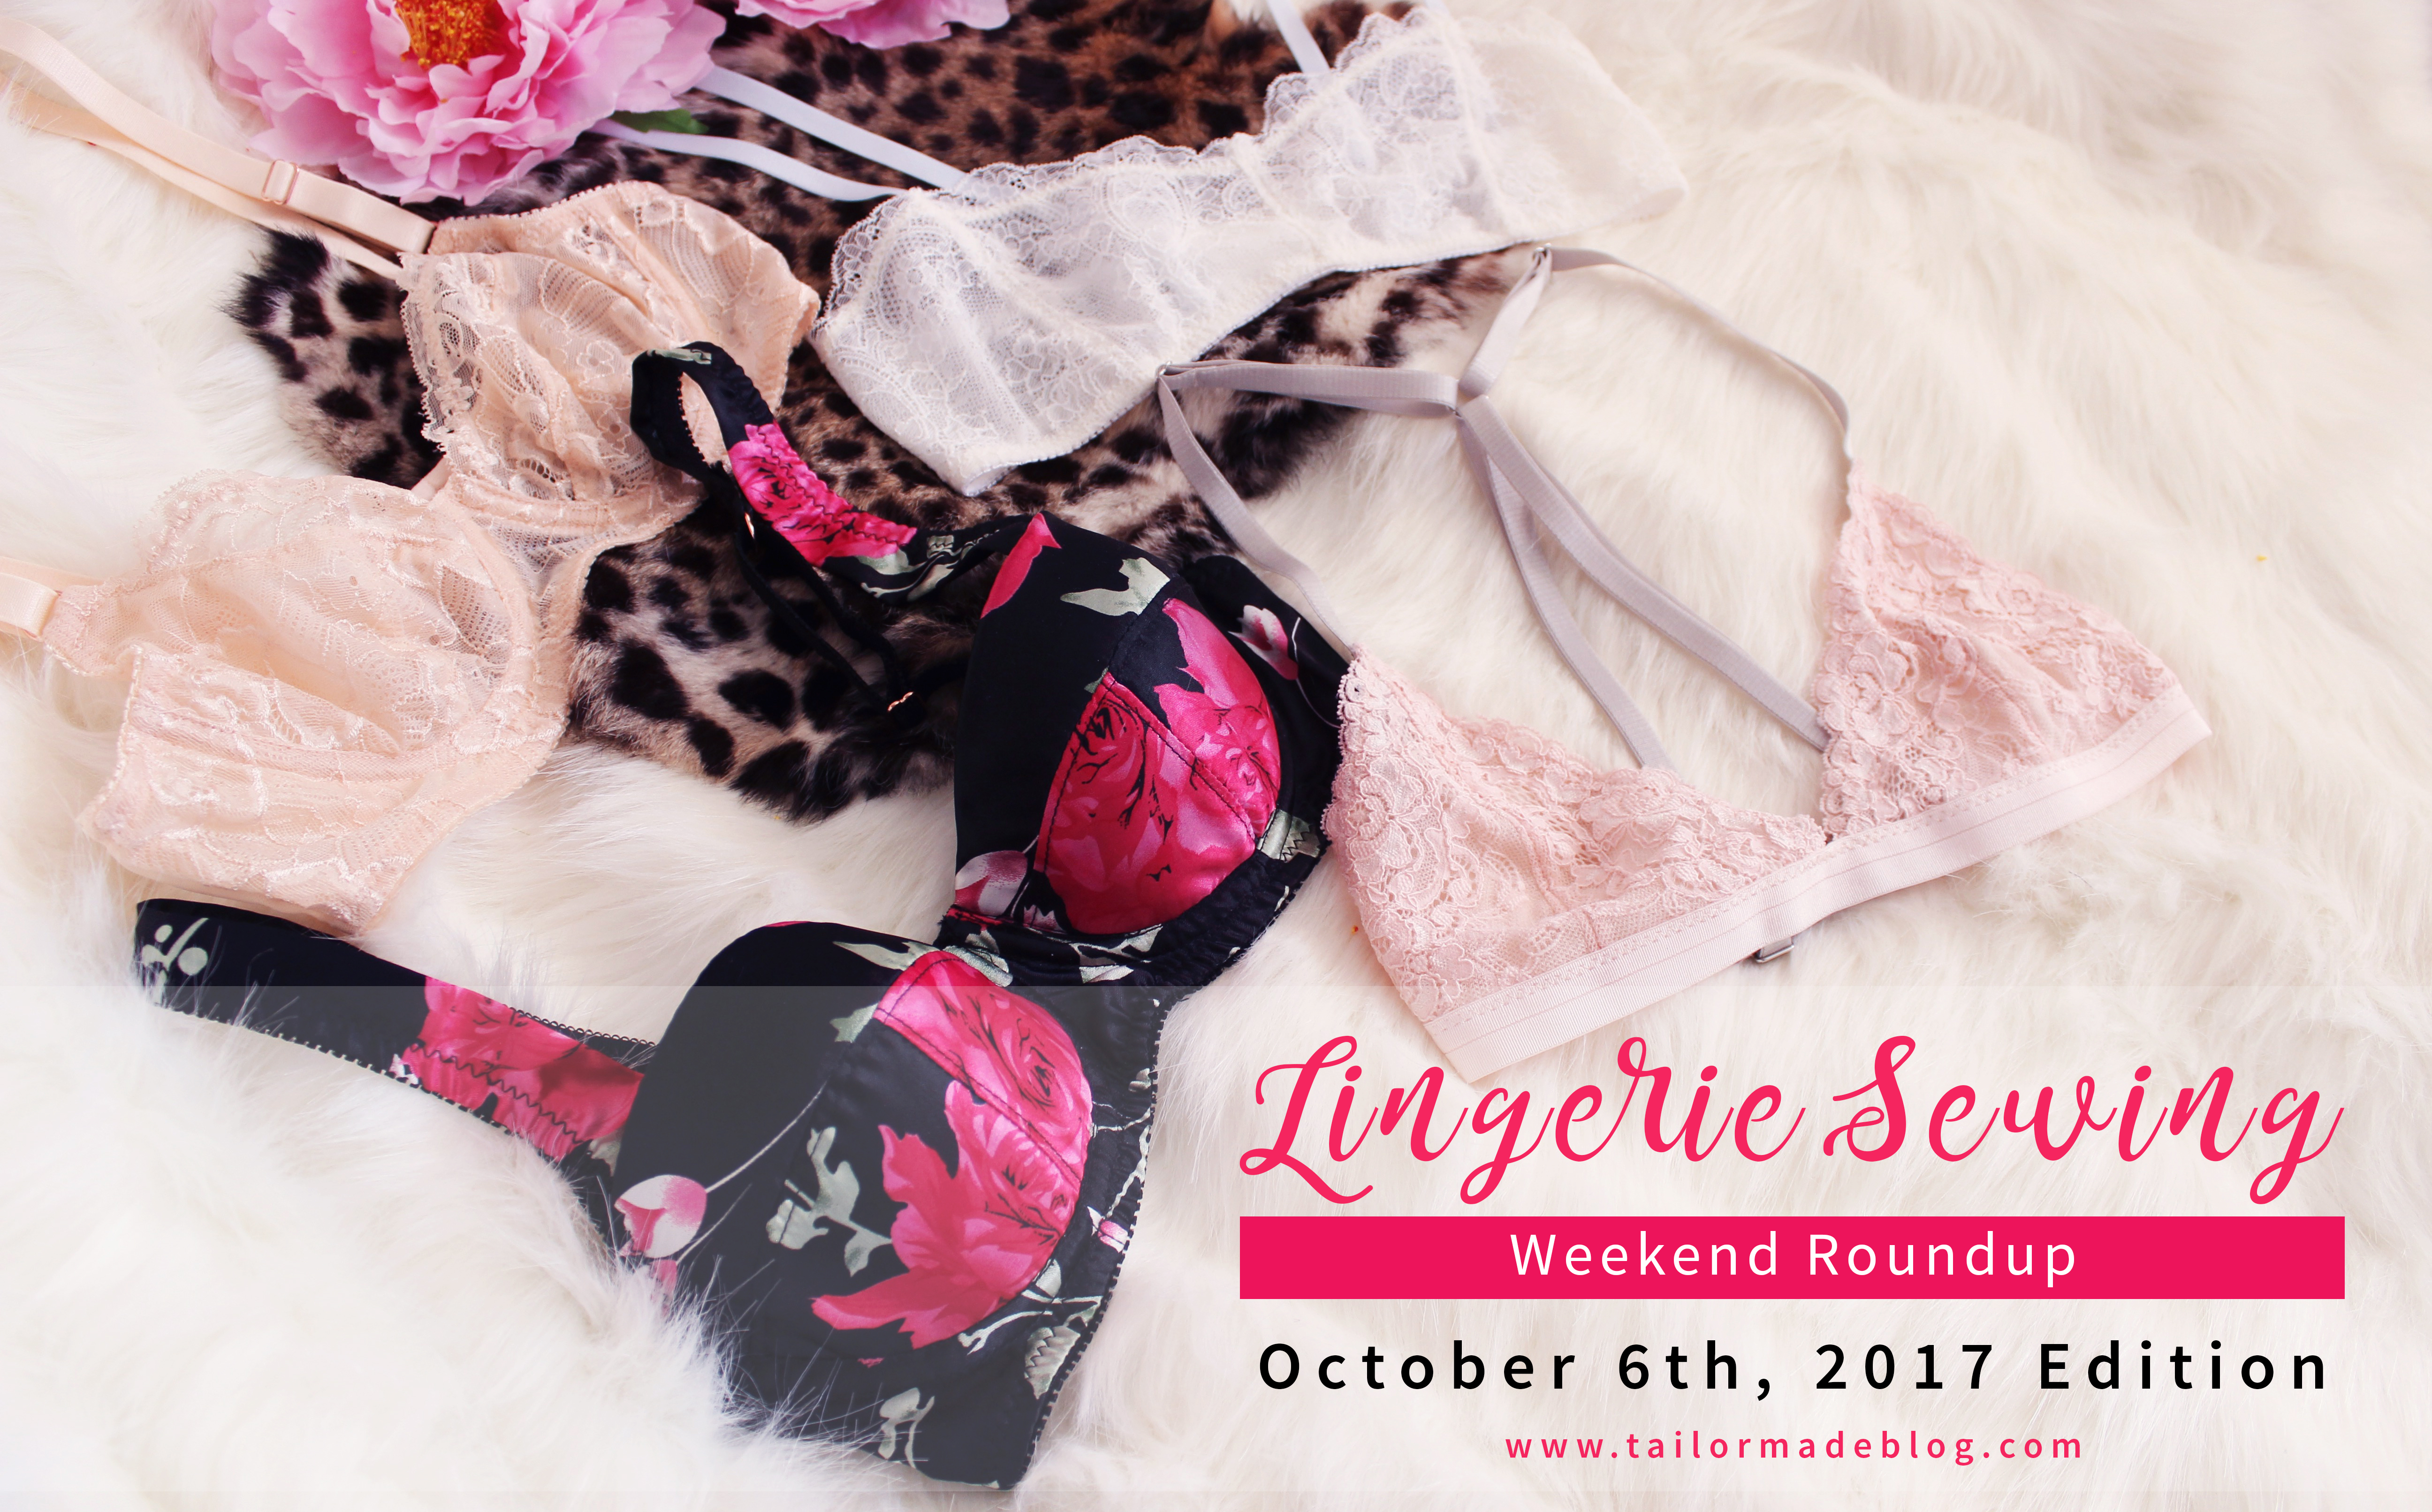 October 6th 2017 Lingerie Sewing Weekend Round Up Latest news and makes and sewing projects from the lingerie sewing bra making community